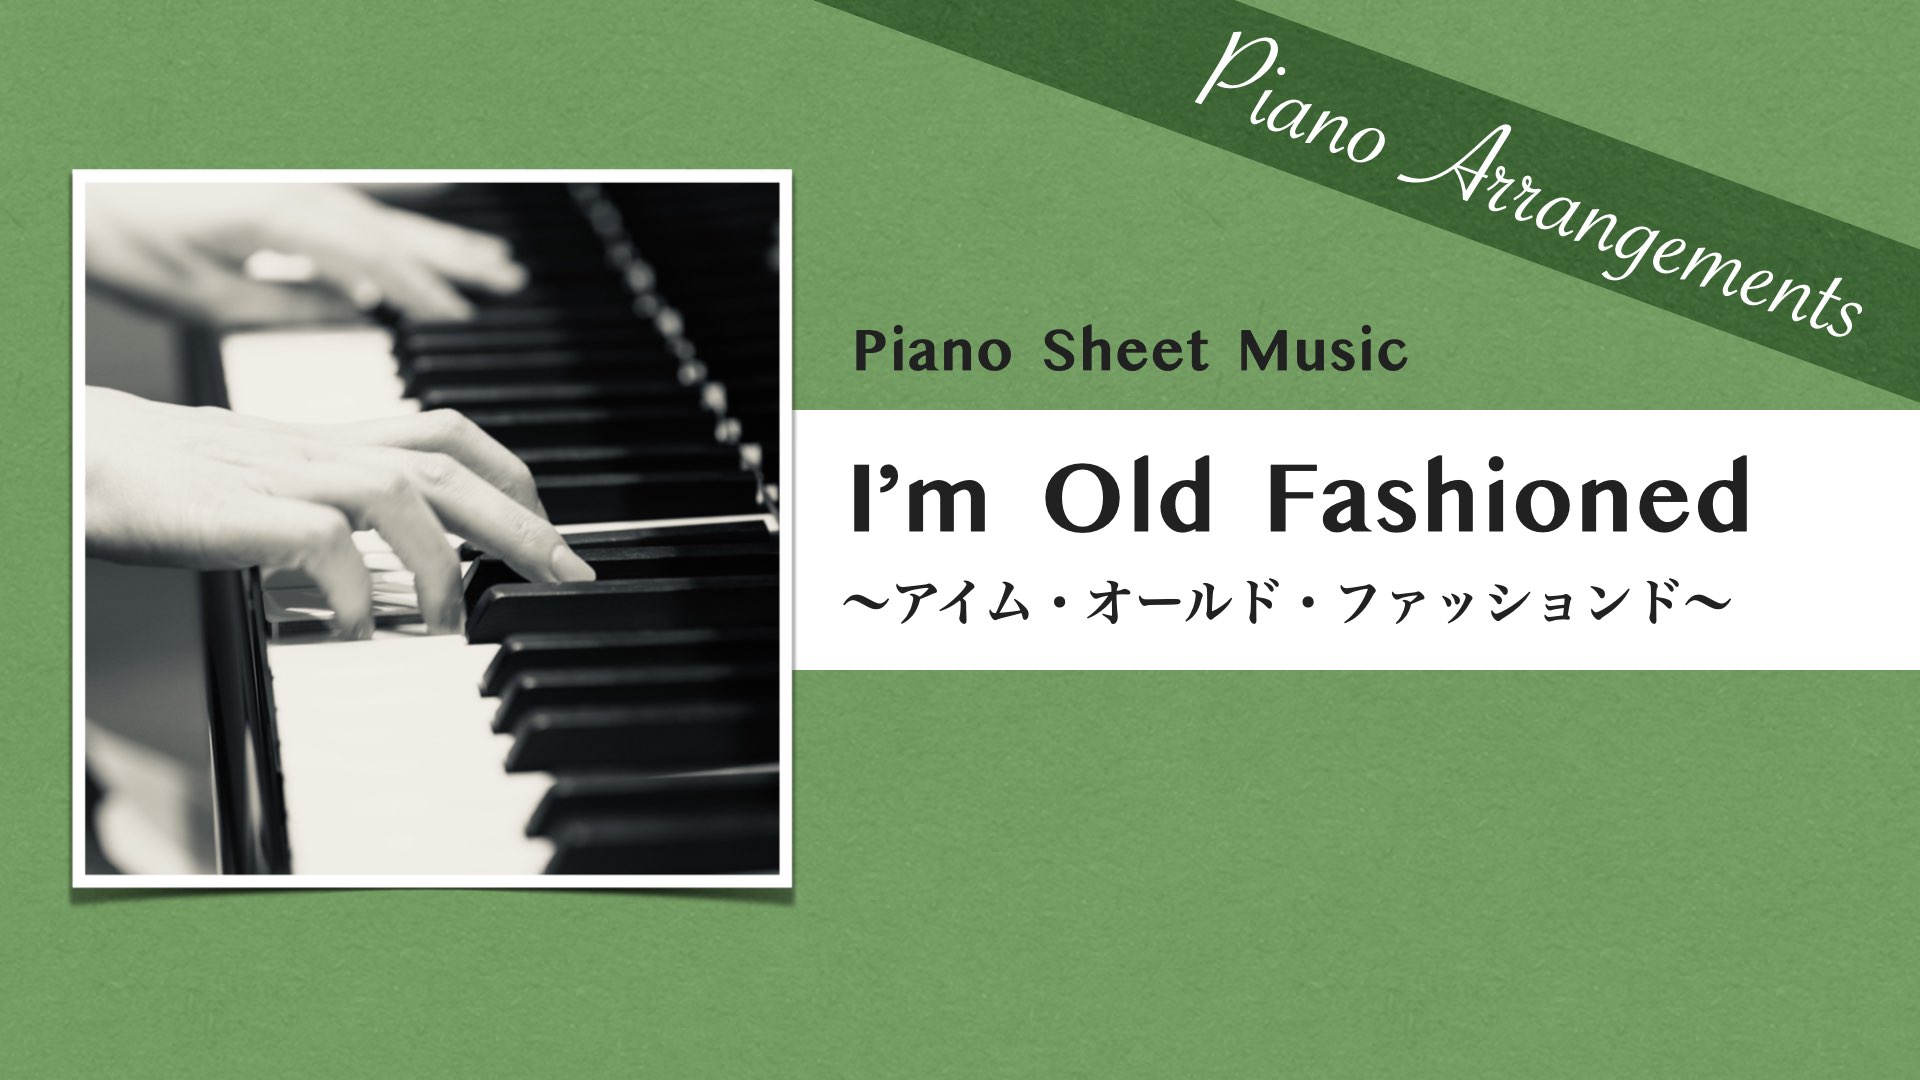 I’m Old Fashioned /Jazz Song【Piano Sheet Music】